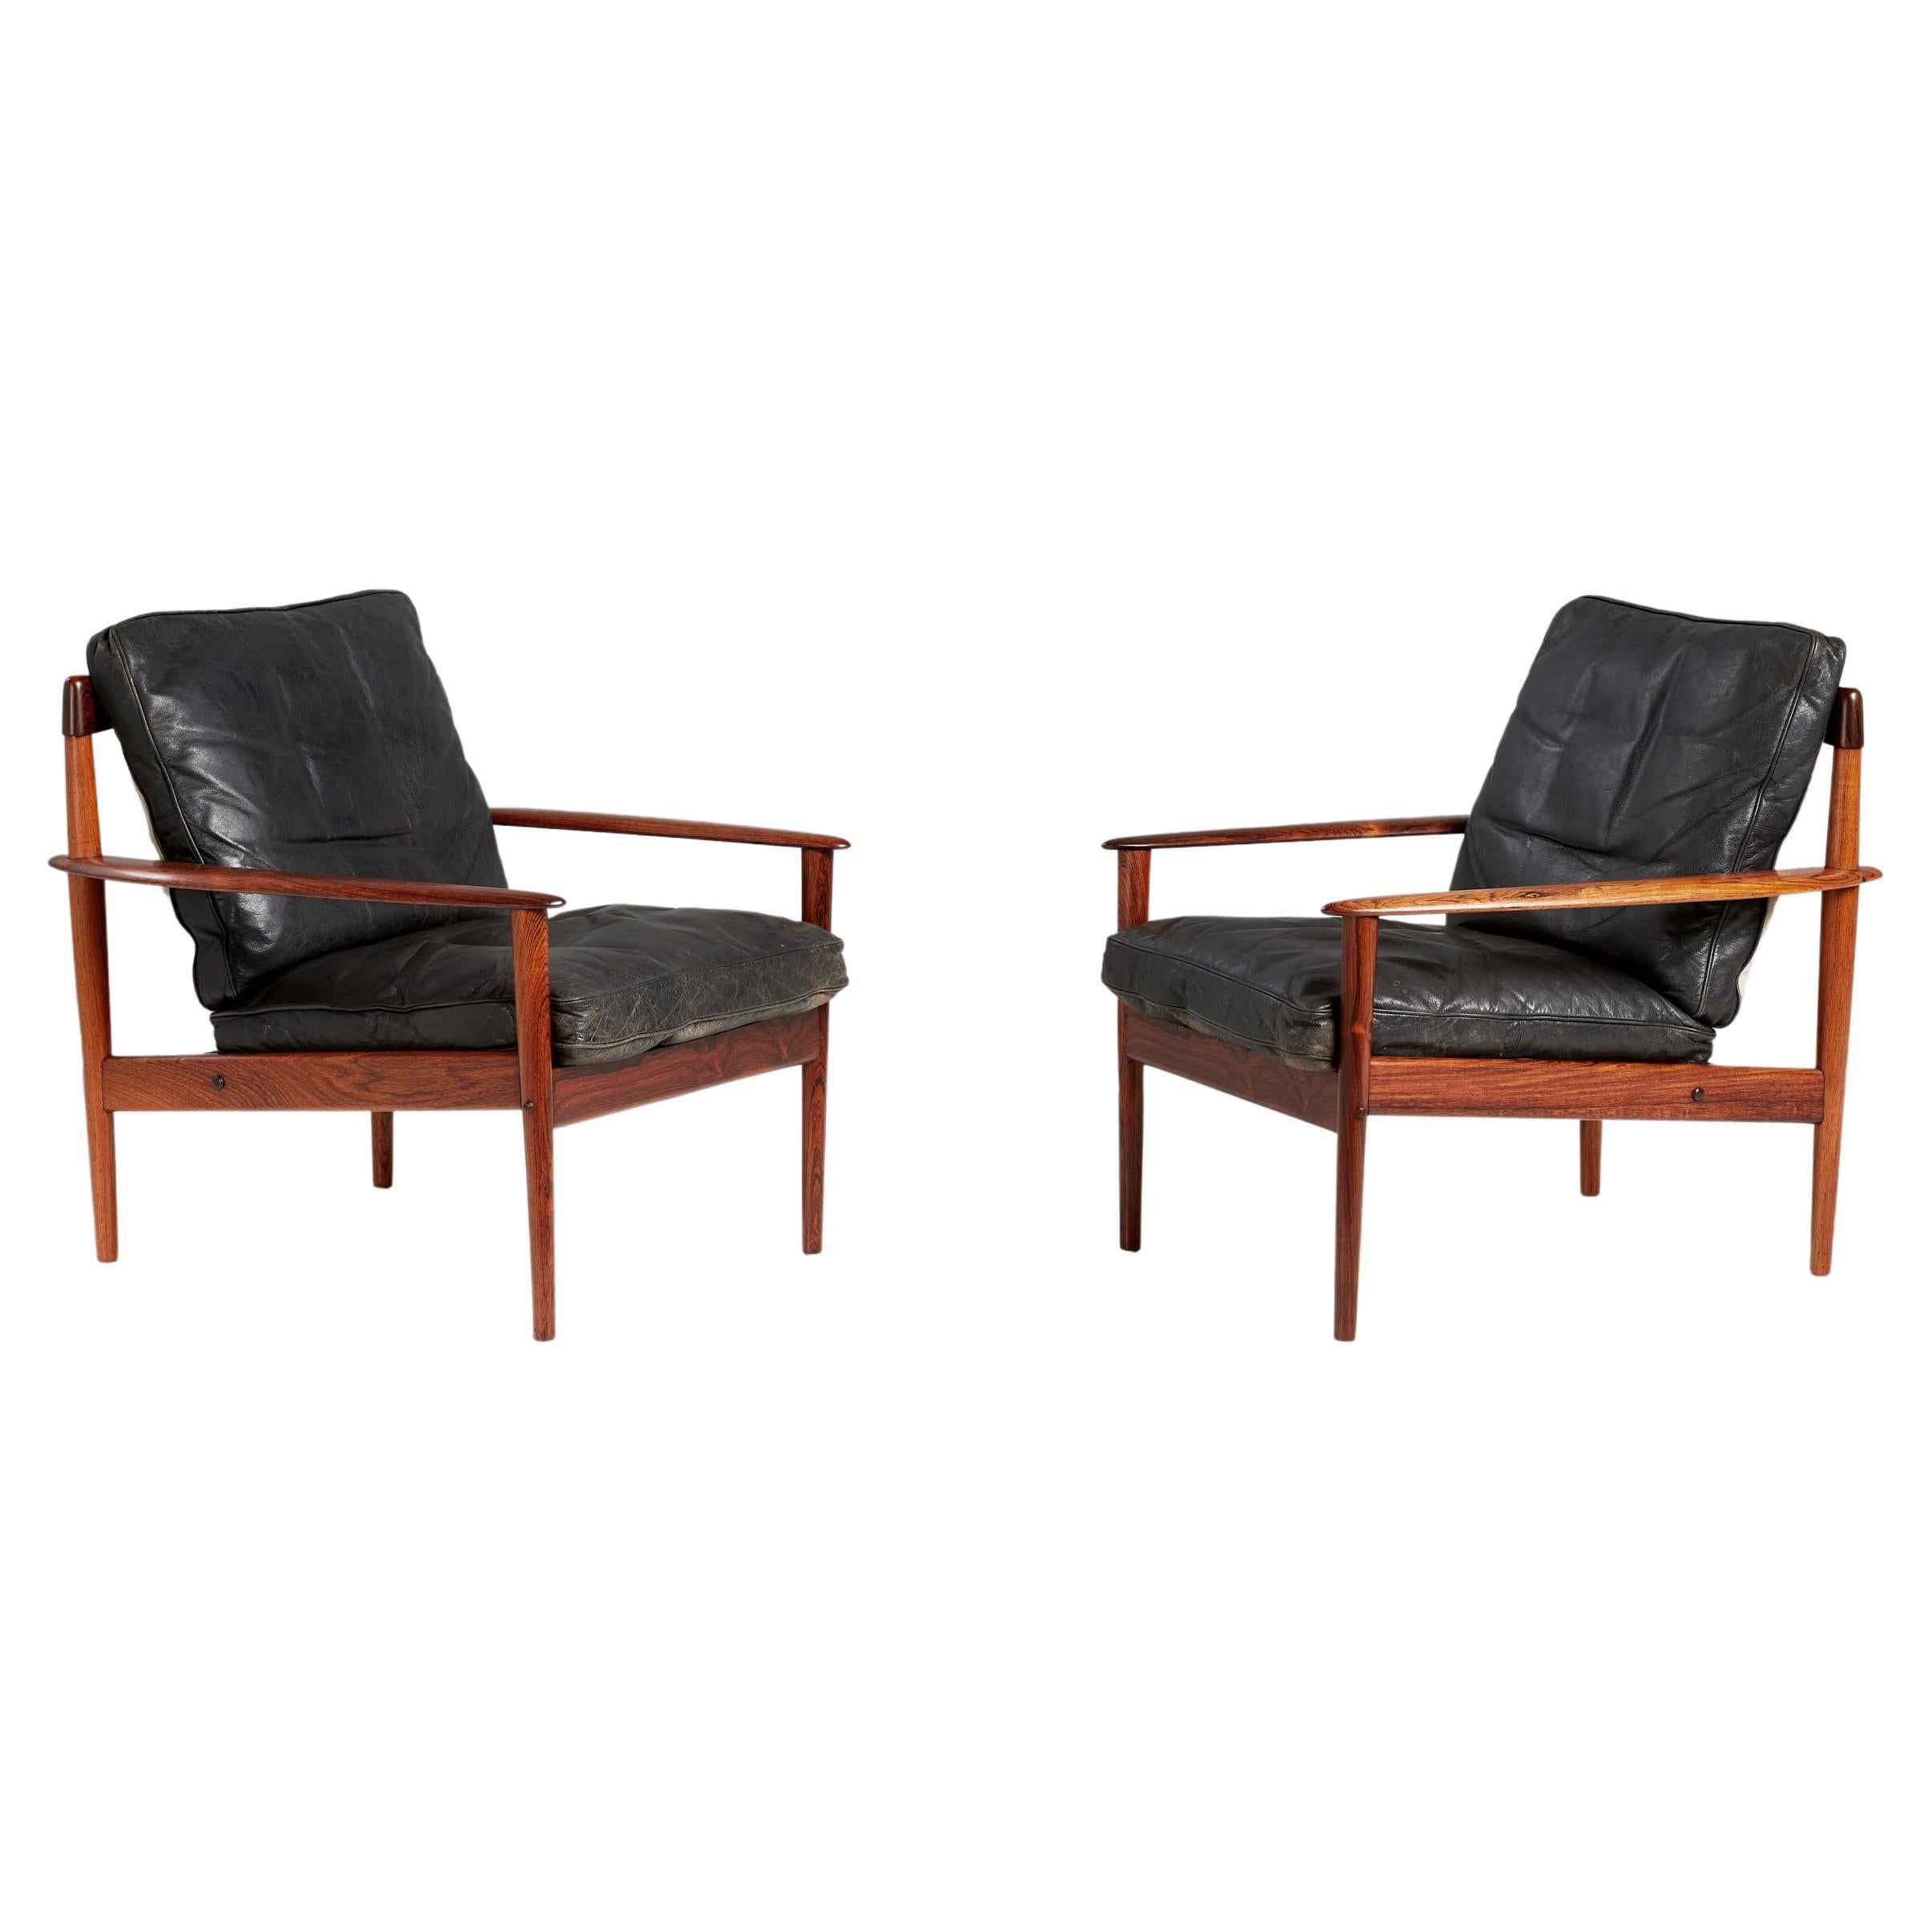 Pair of Grete Jalk PJ-56 Rosewood Lounge Chairs 1950s